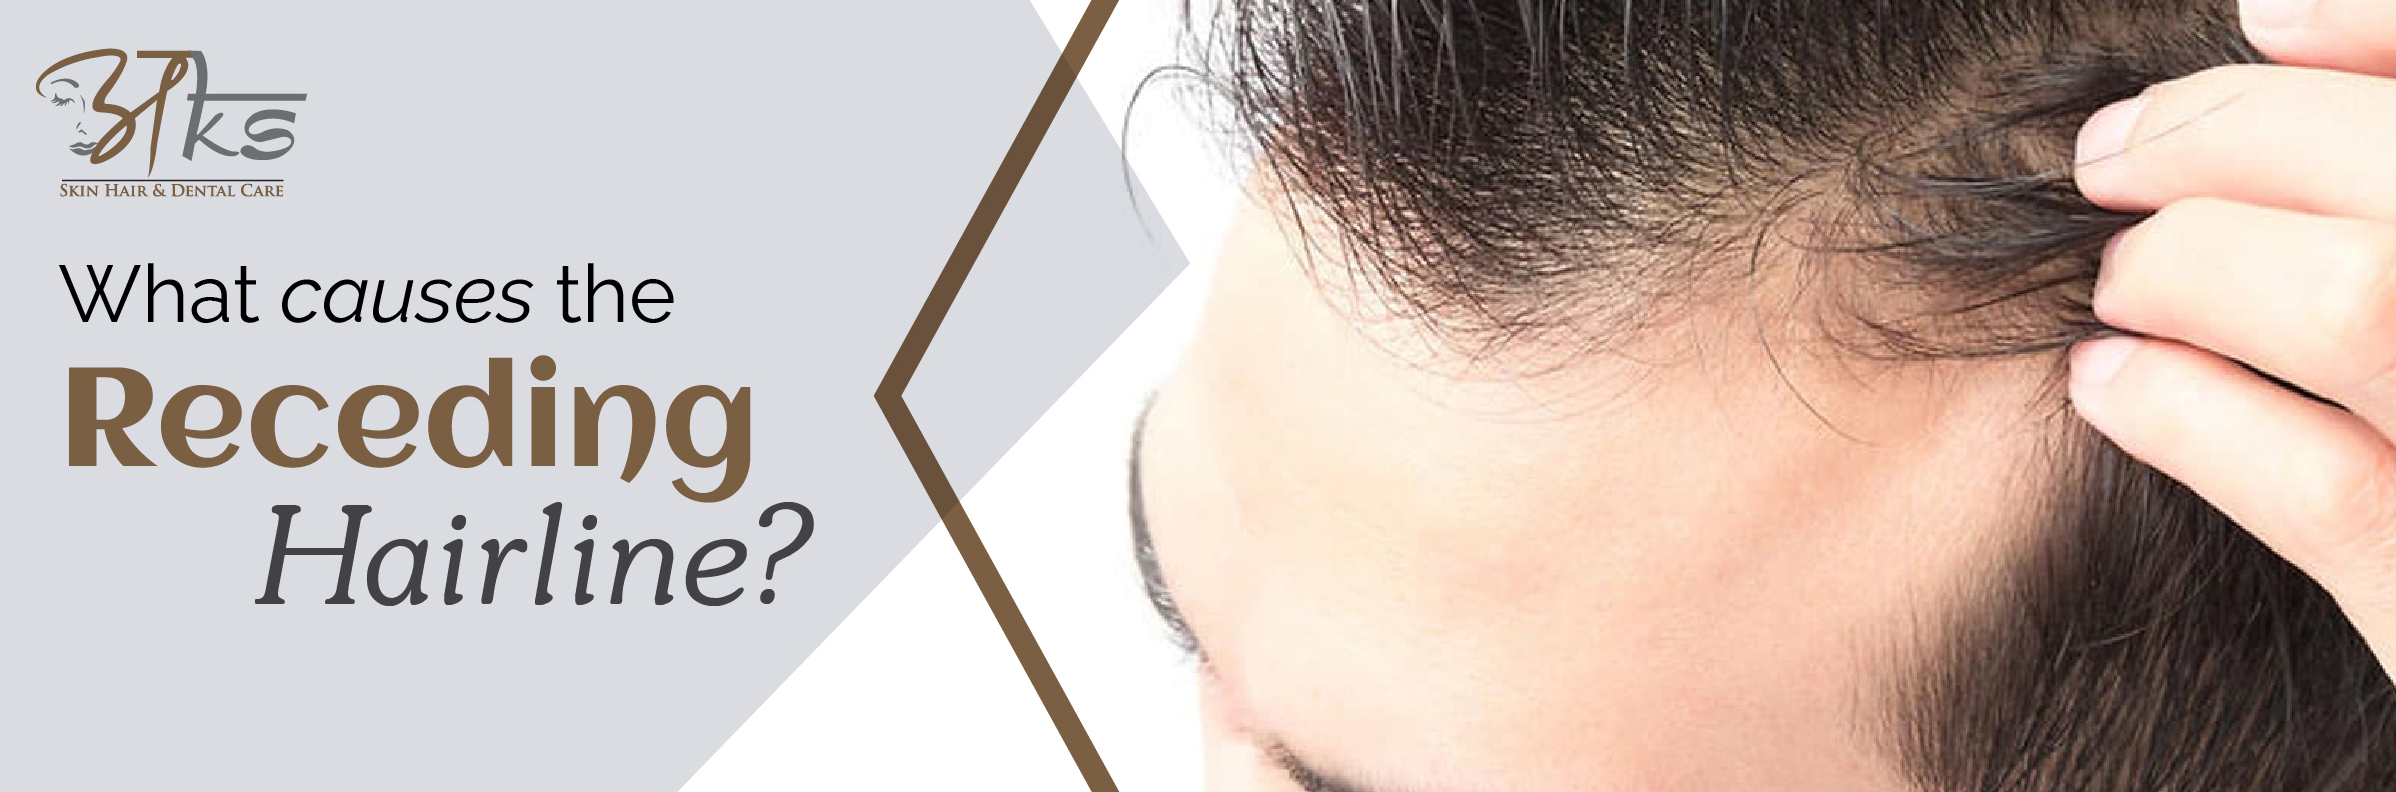 Why Choose a Reputed Hair Transplant Clinic in Gurgaon